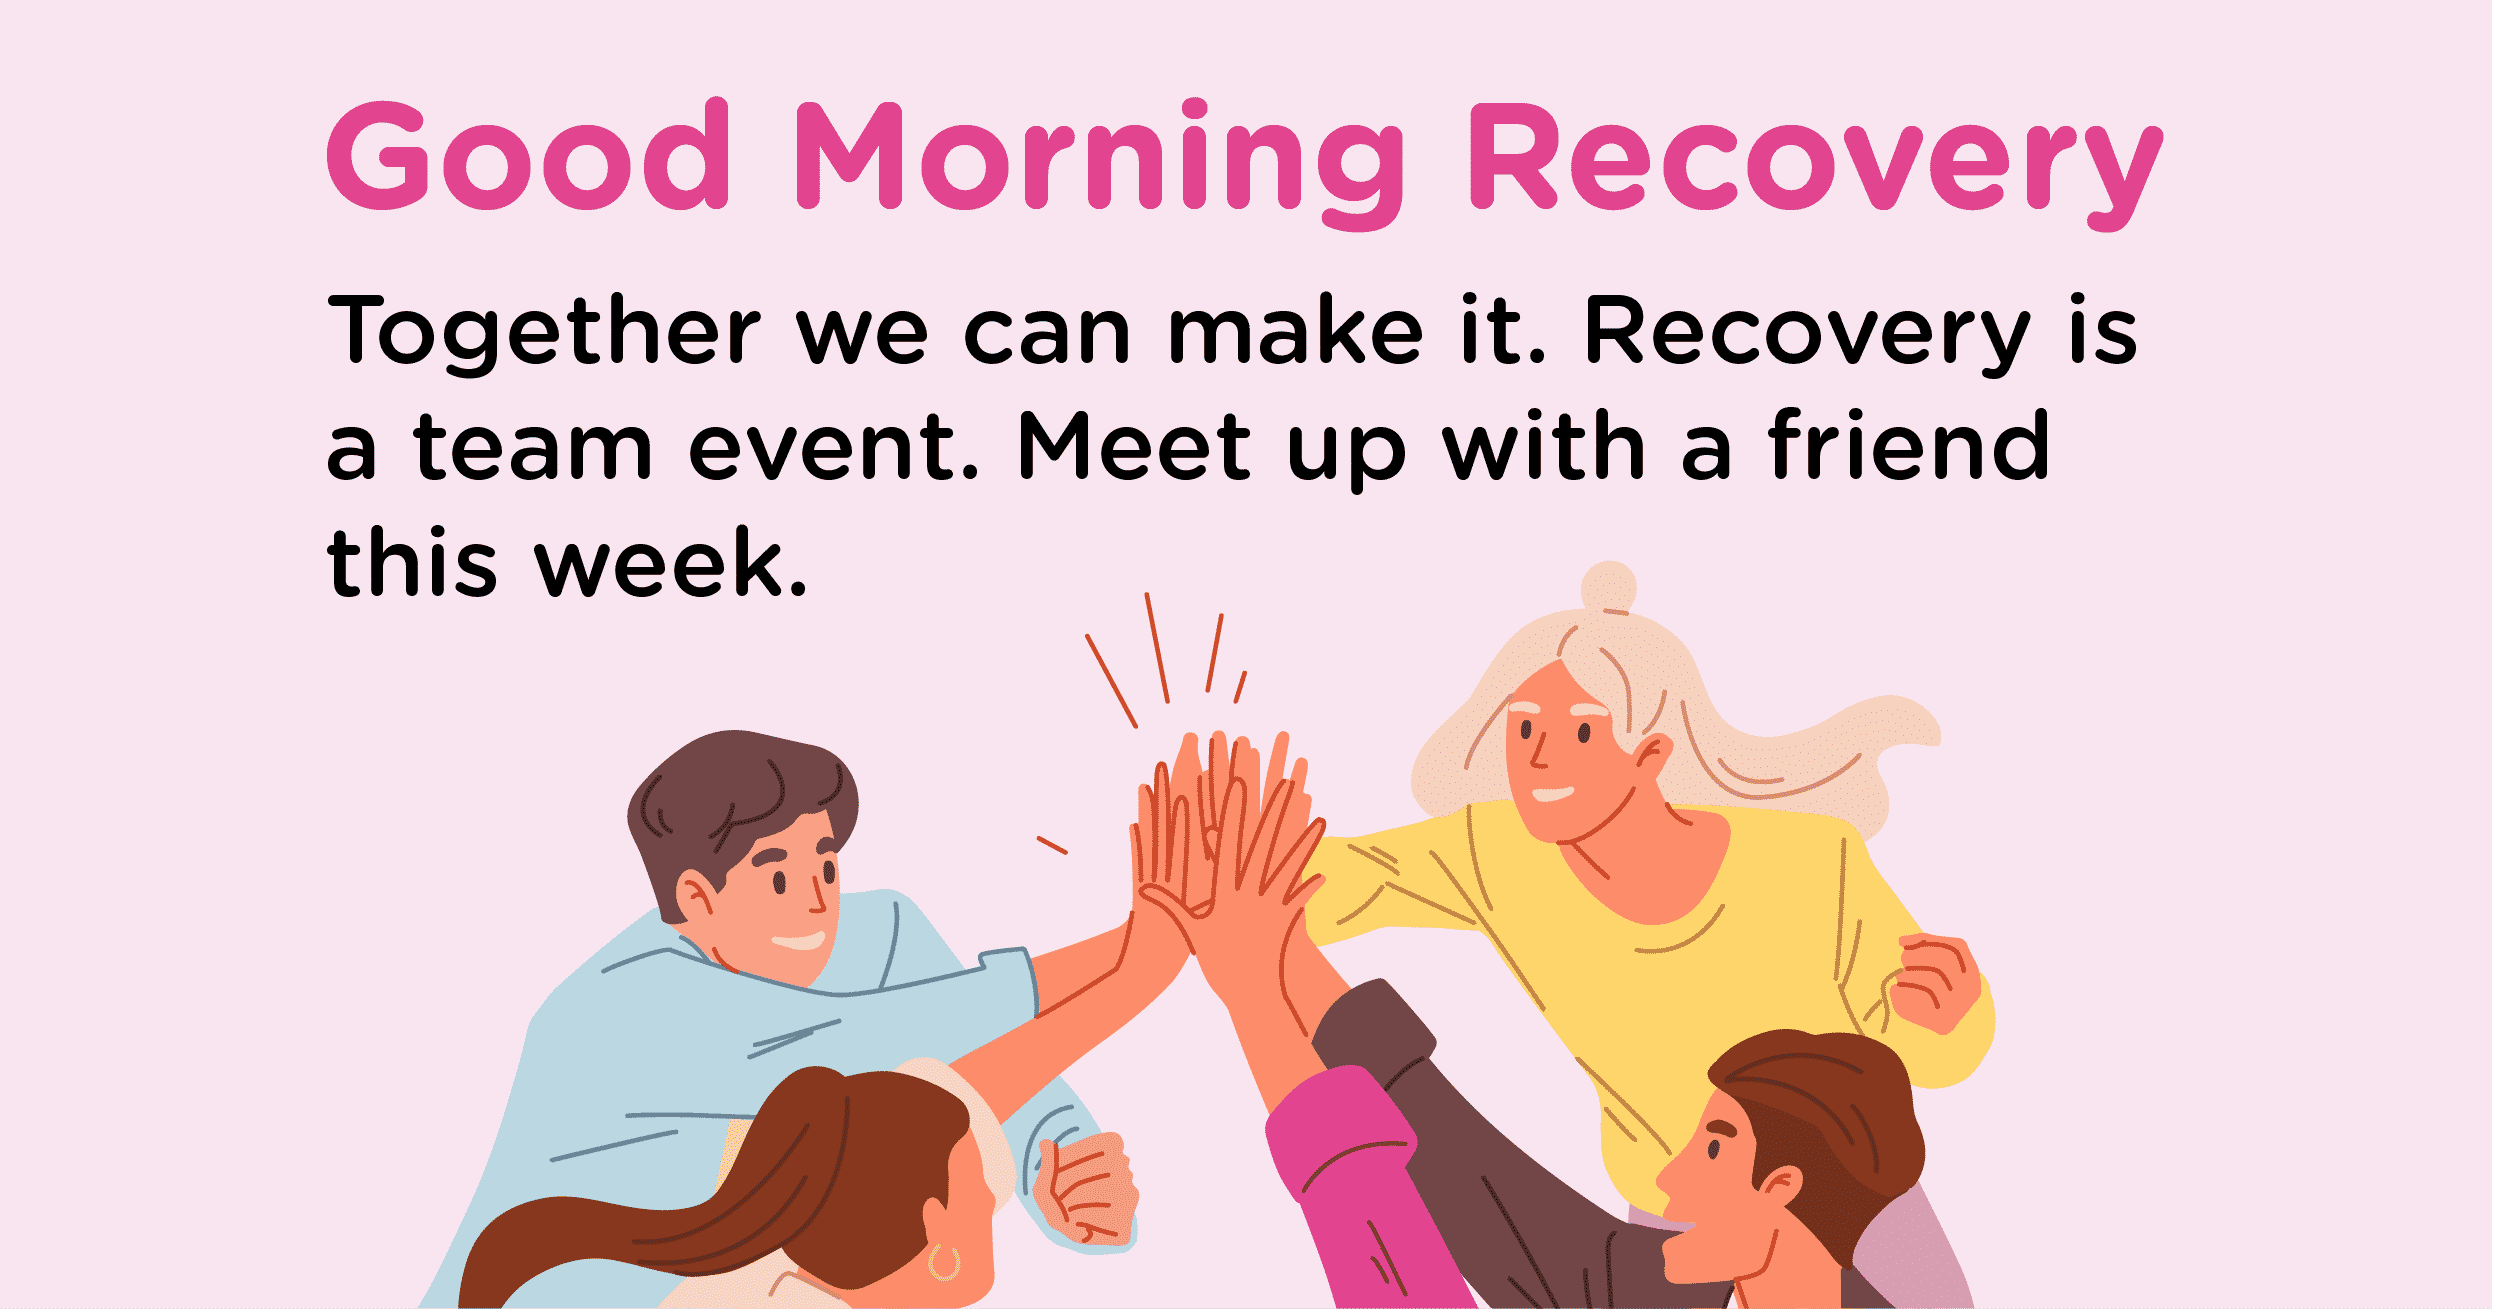 Good Morning Recovery together